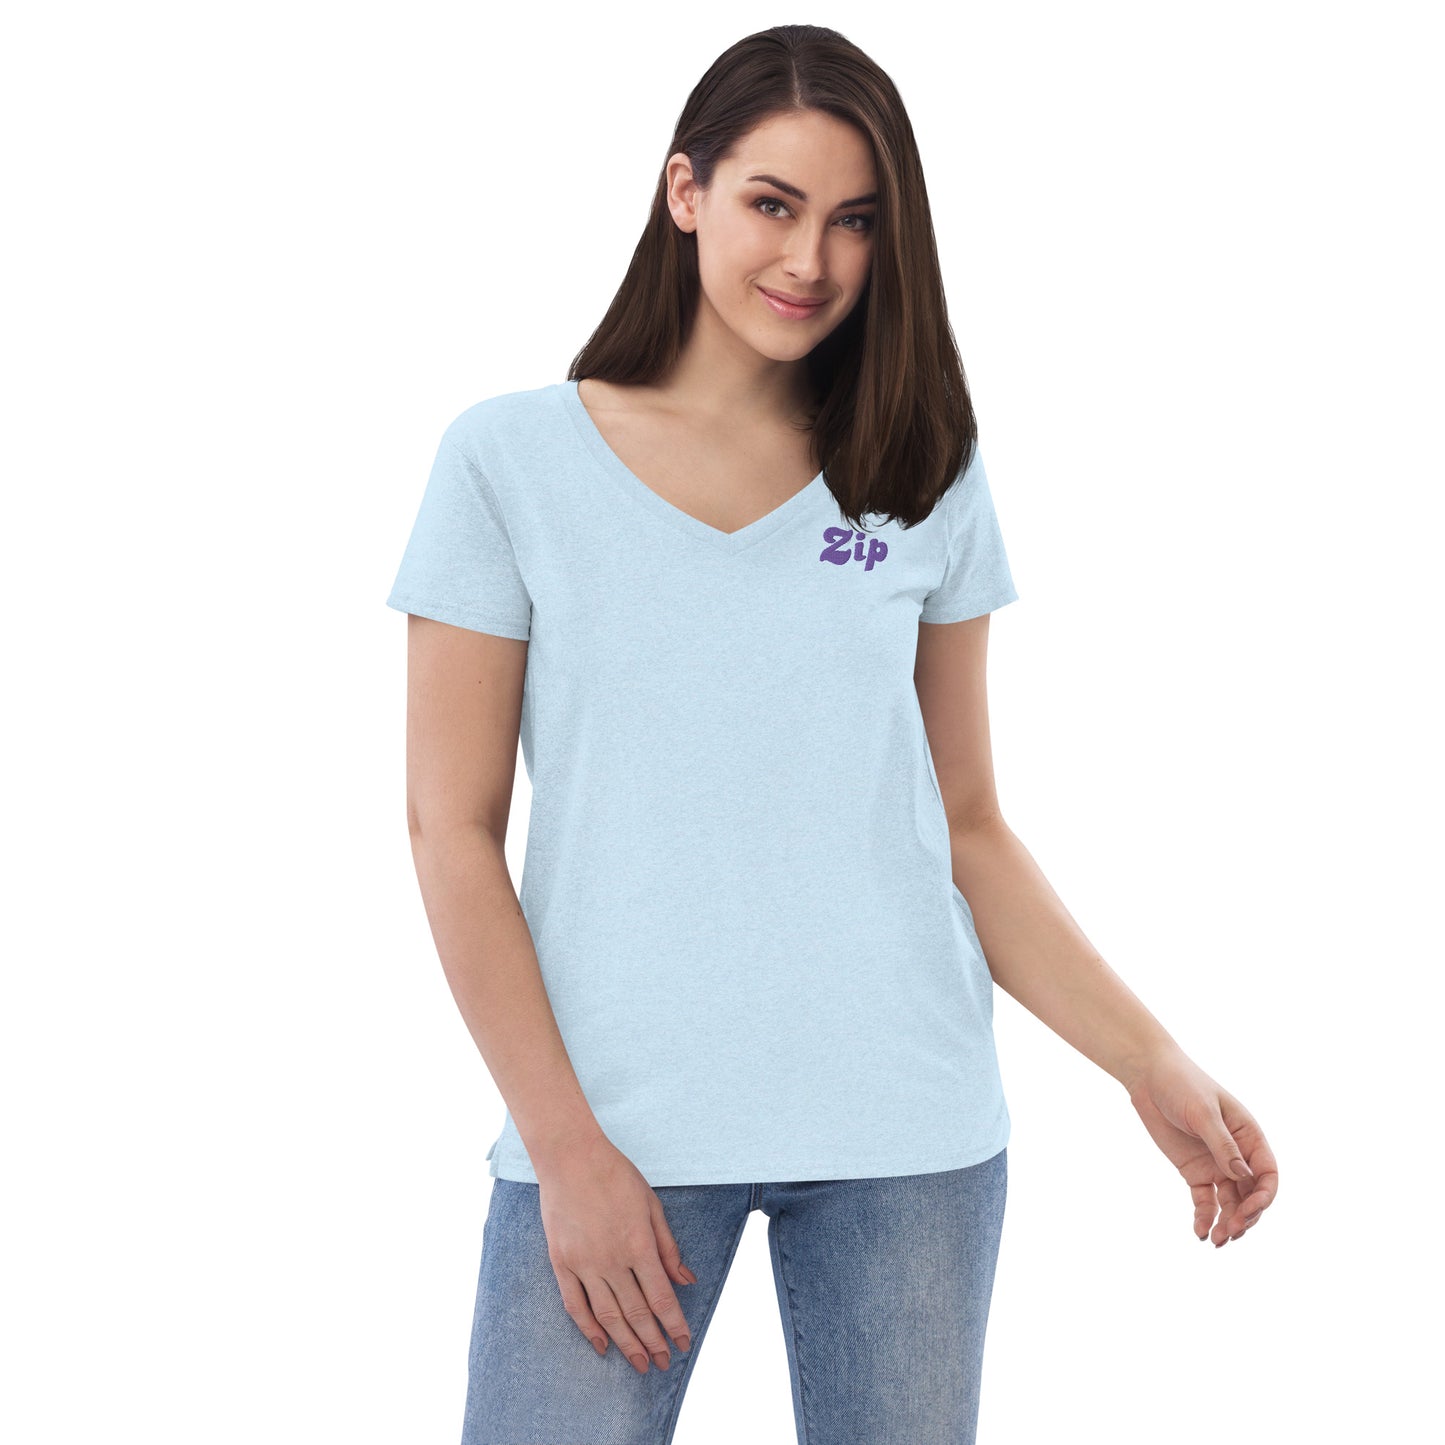 ZIP women’s embroidered recycled v-neck t-shirt